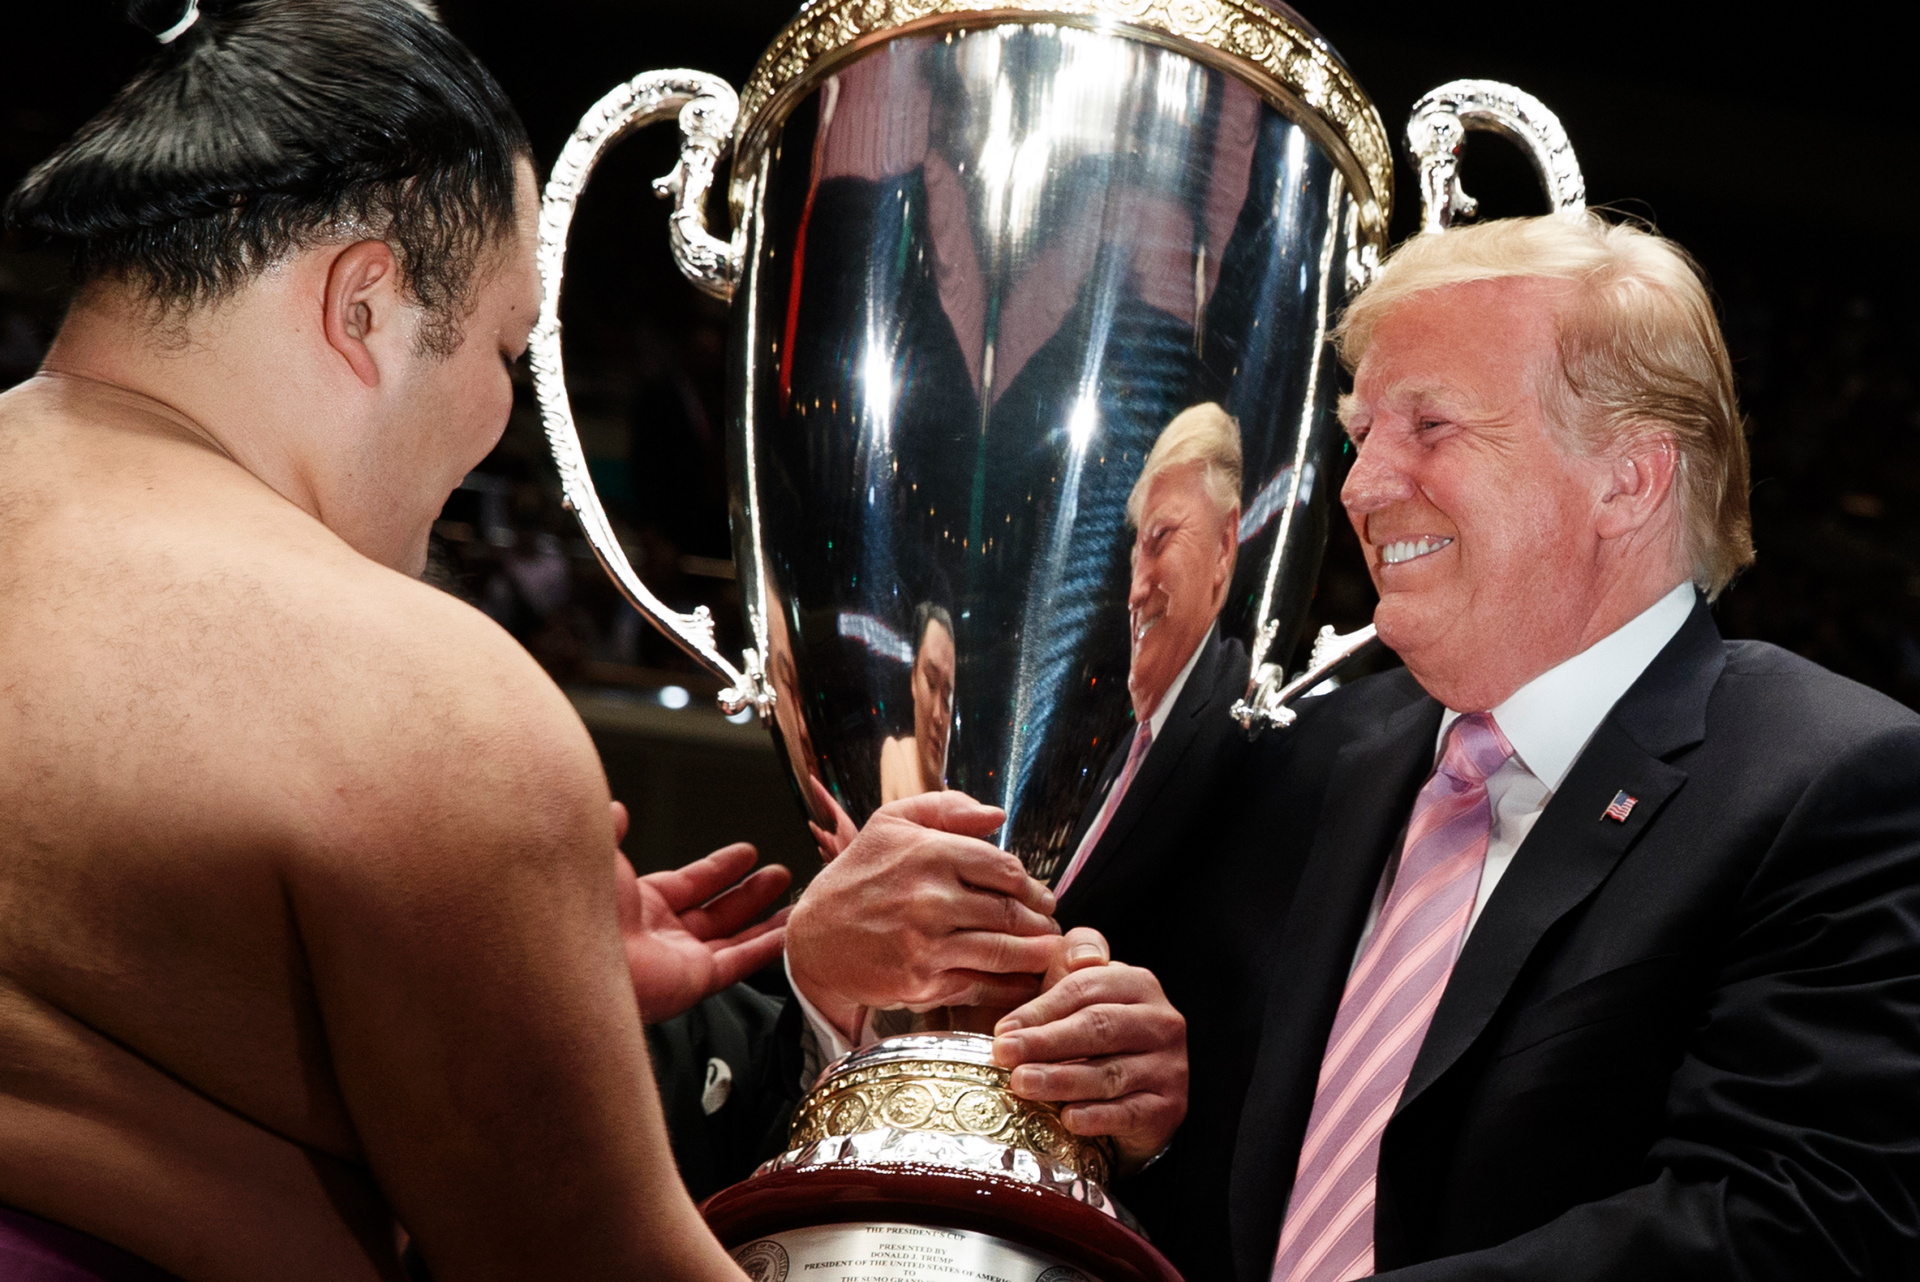 Trump watches sumo, but it's not just a sport in Japan